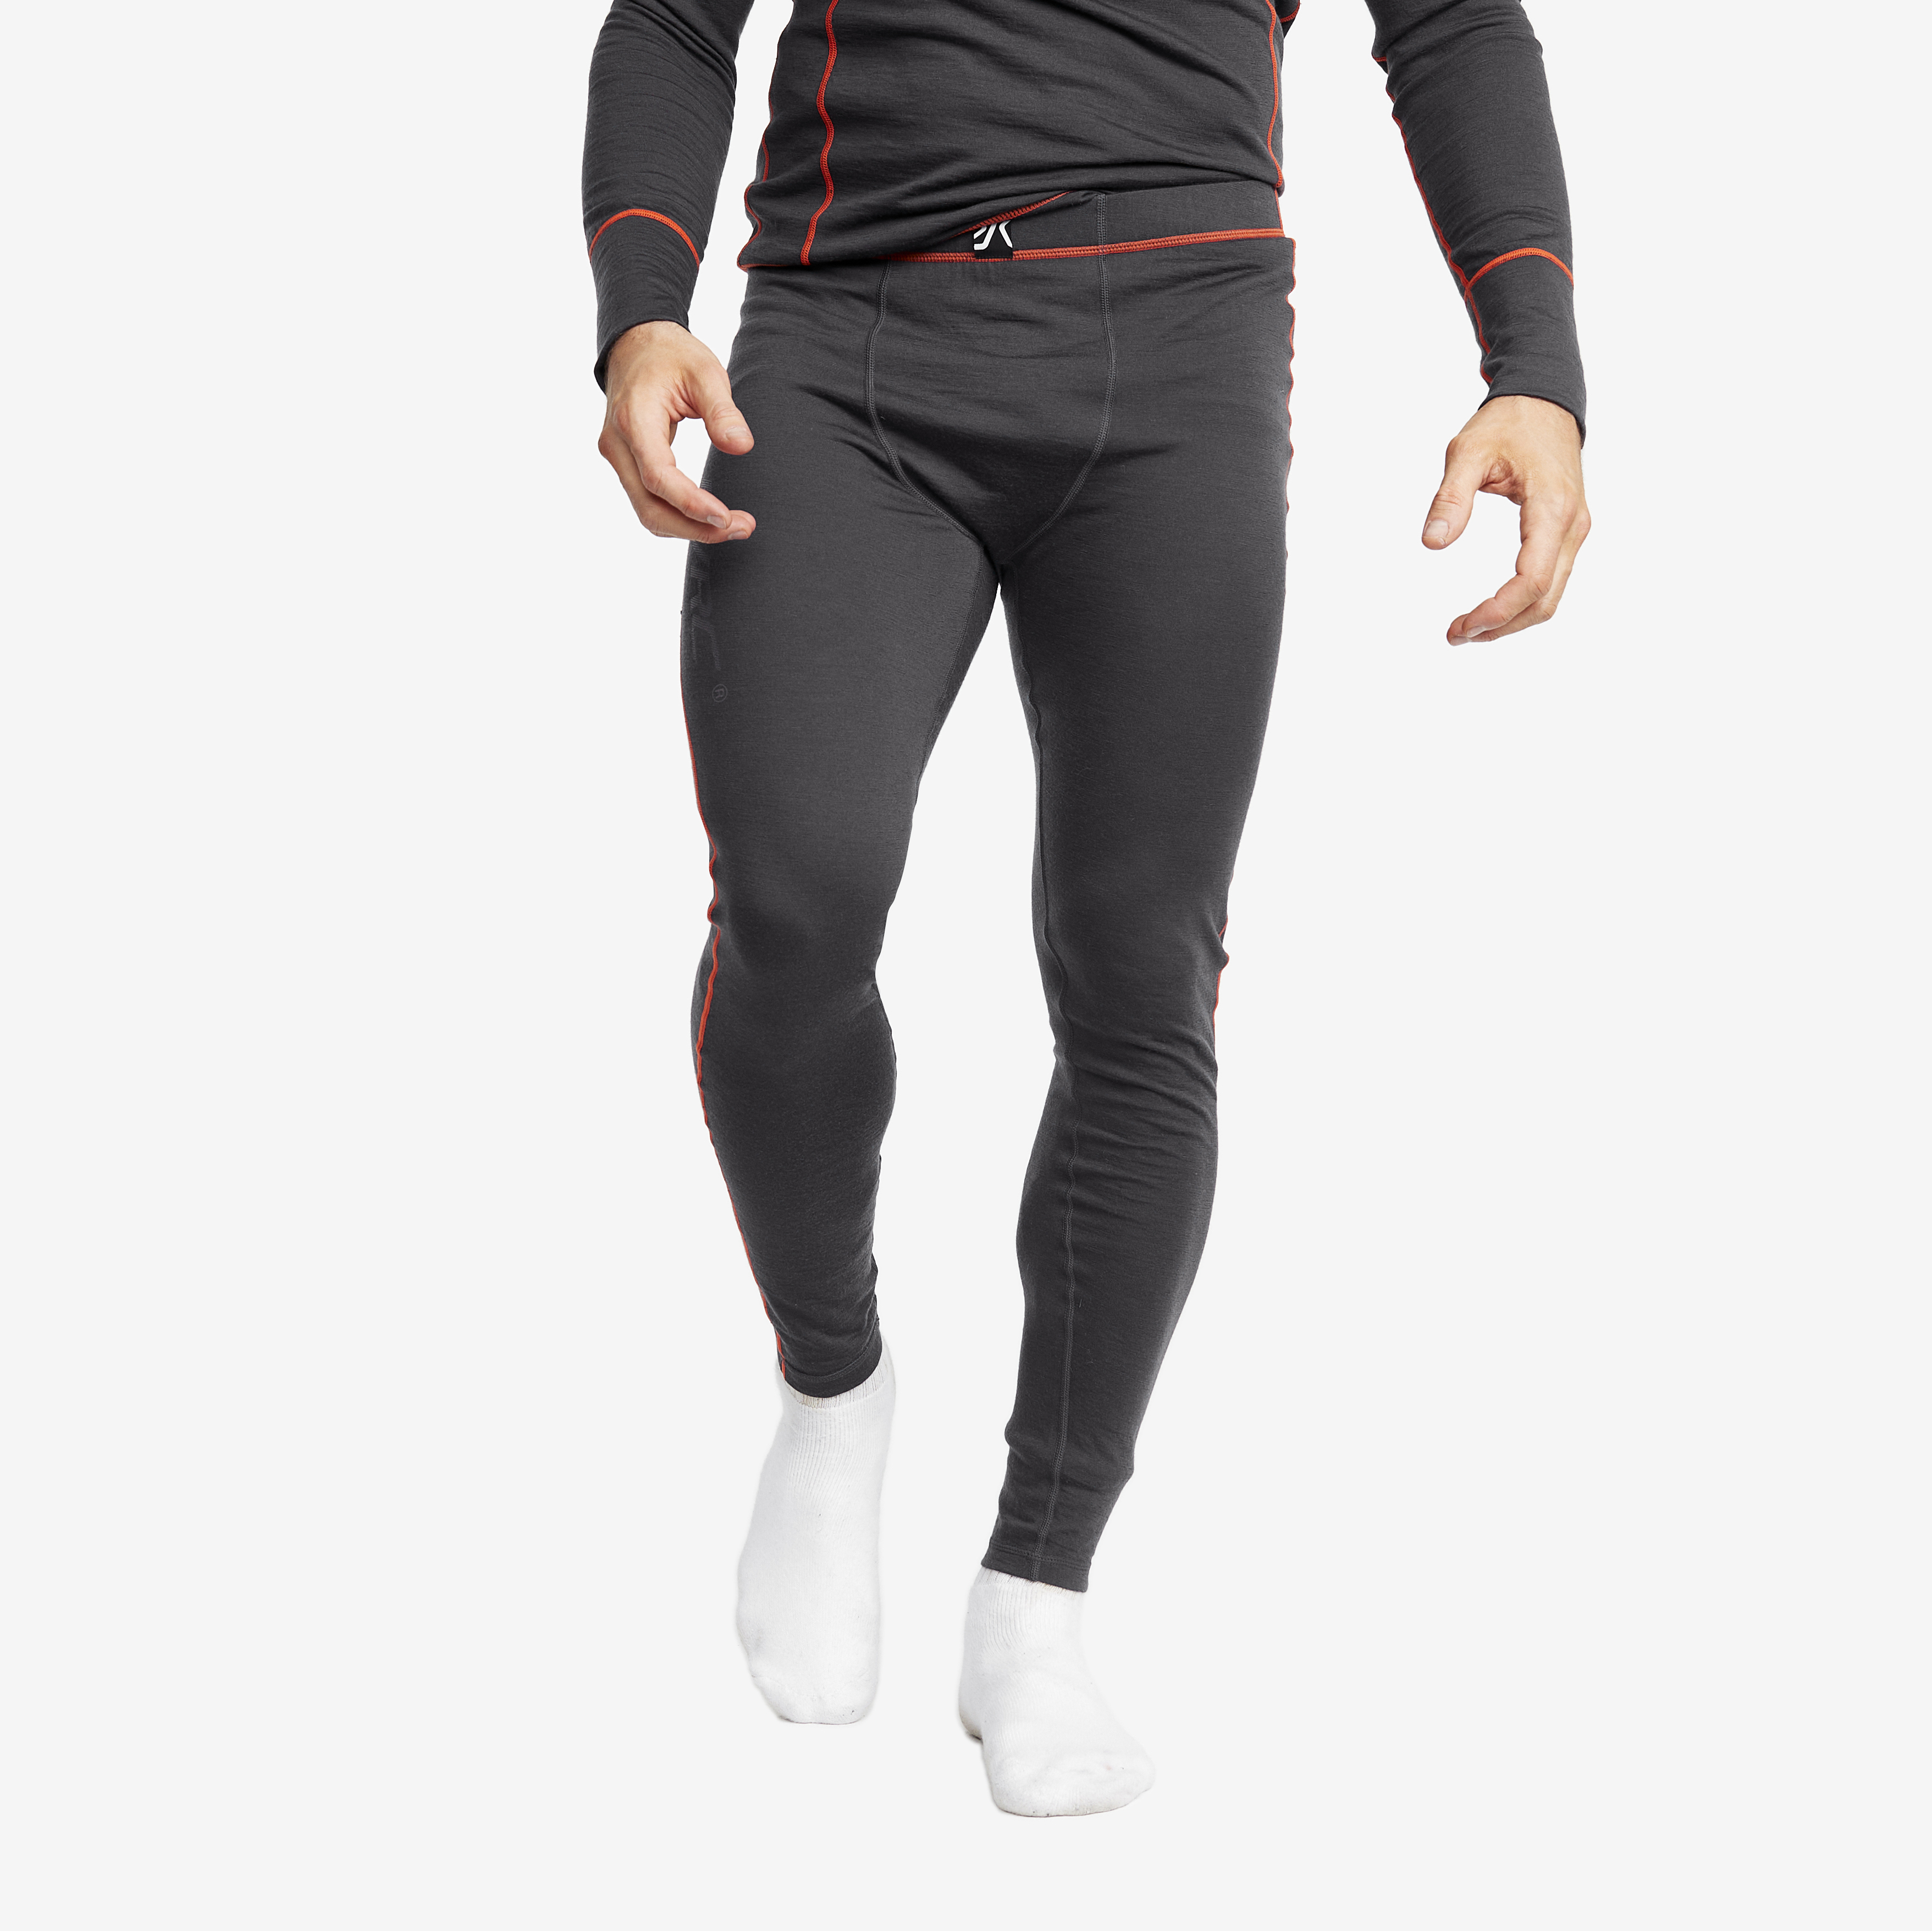 Outright Merino Pants Anthracite Herre